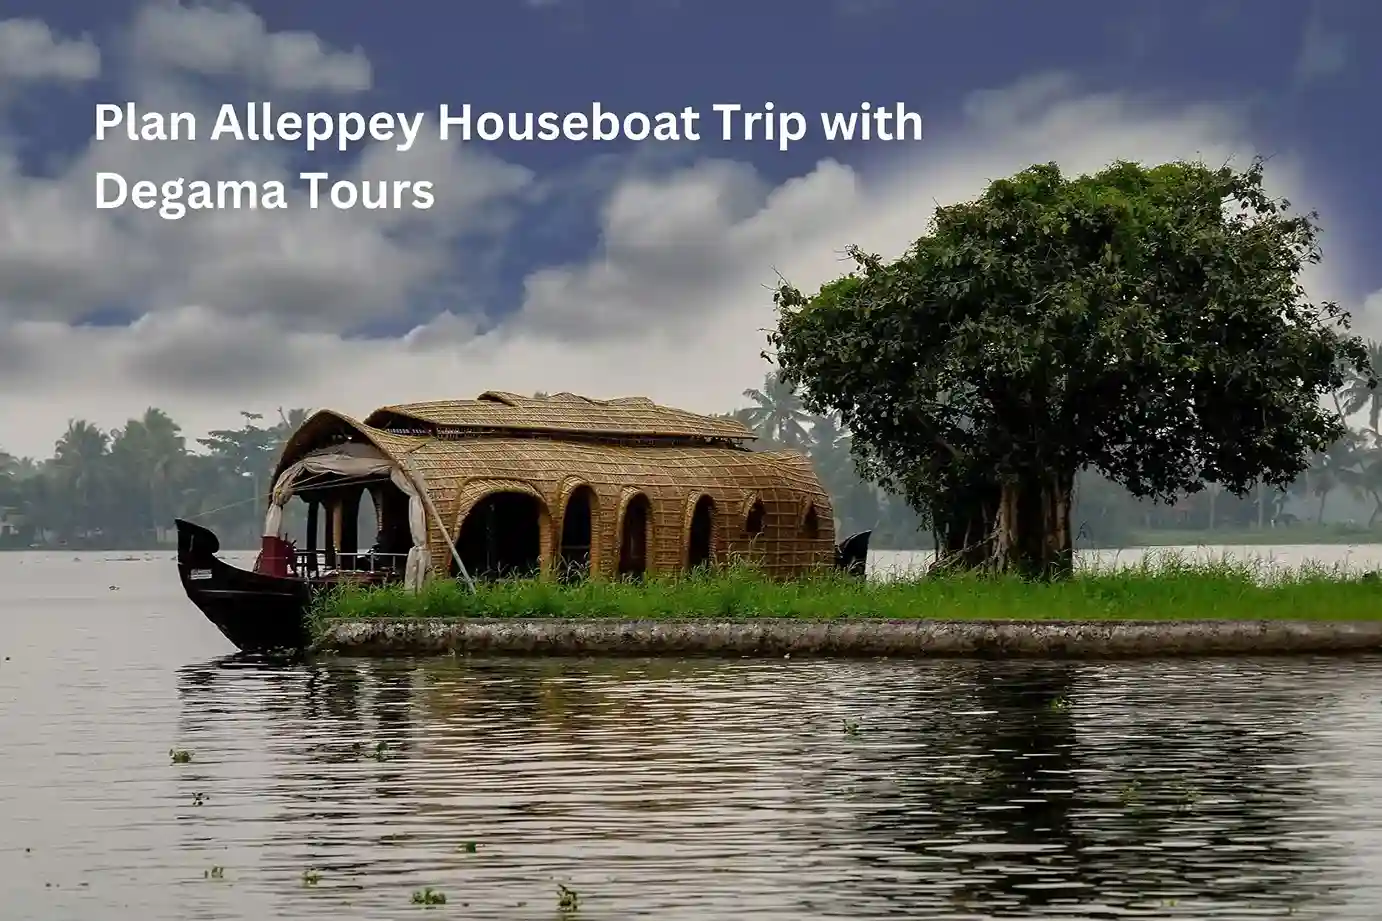 a traditional houseboat floating on calm waters, with lush greenery and a tree in the background under a cloudy sky. 